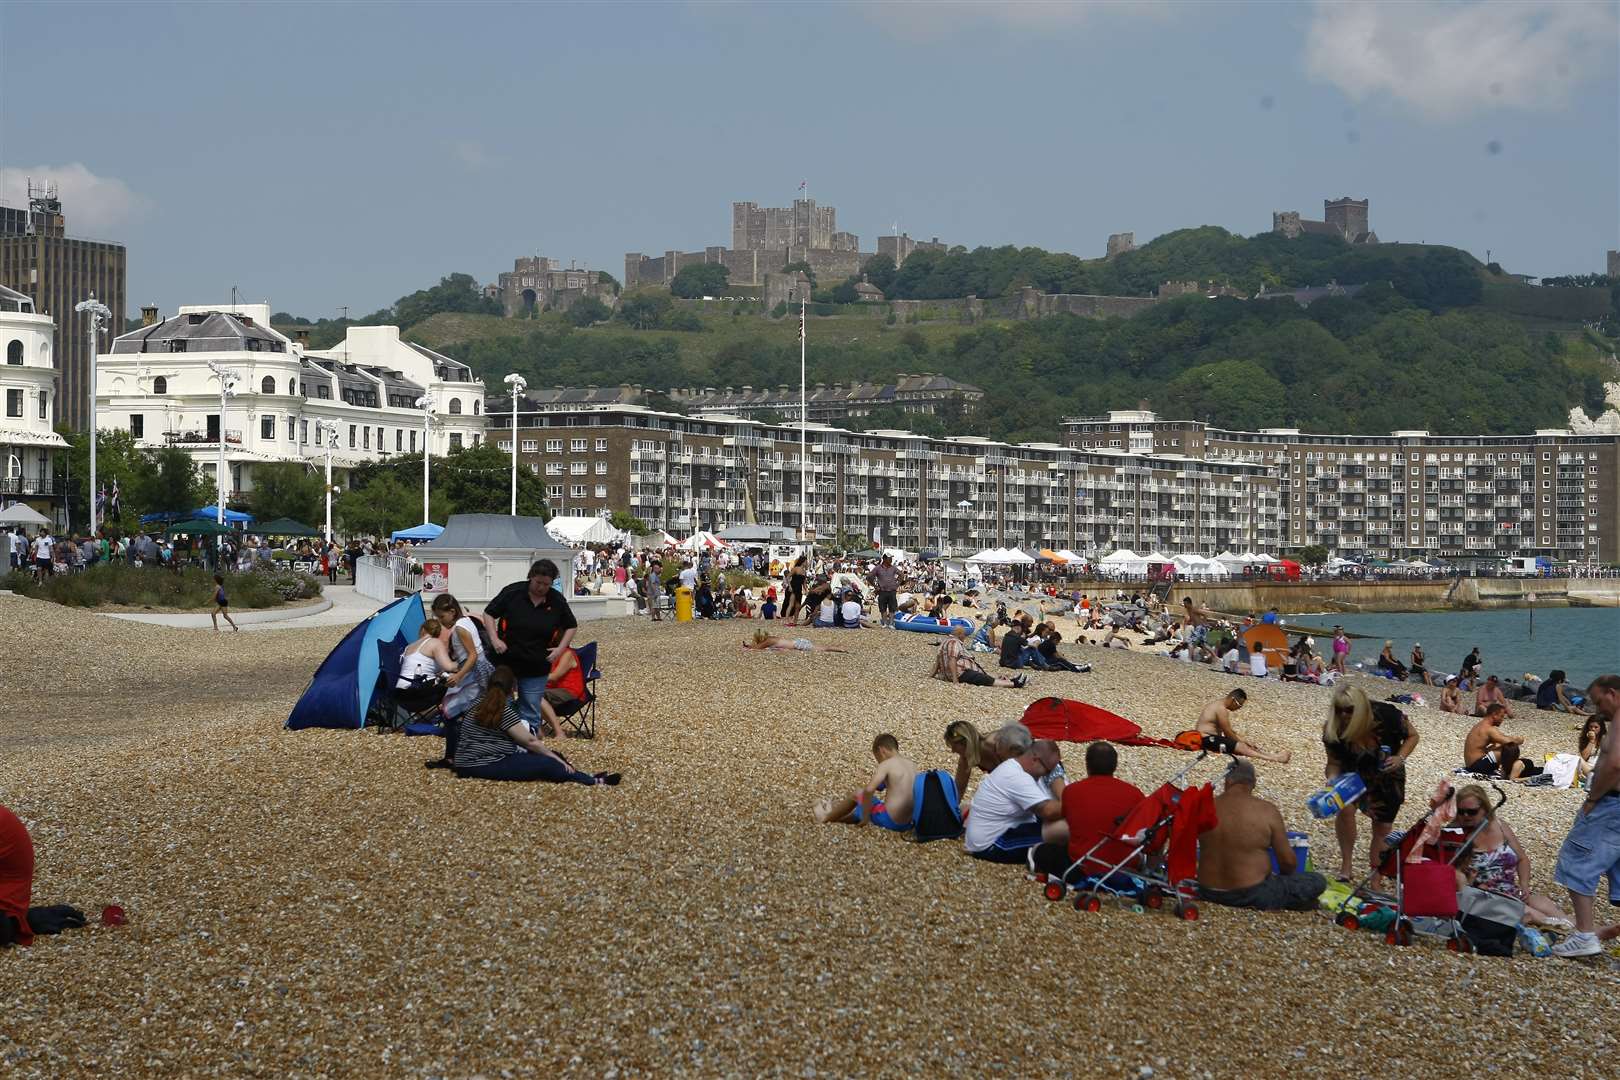 Dover Regatta attracts thousands of people each year